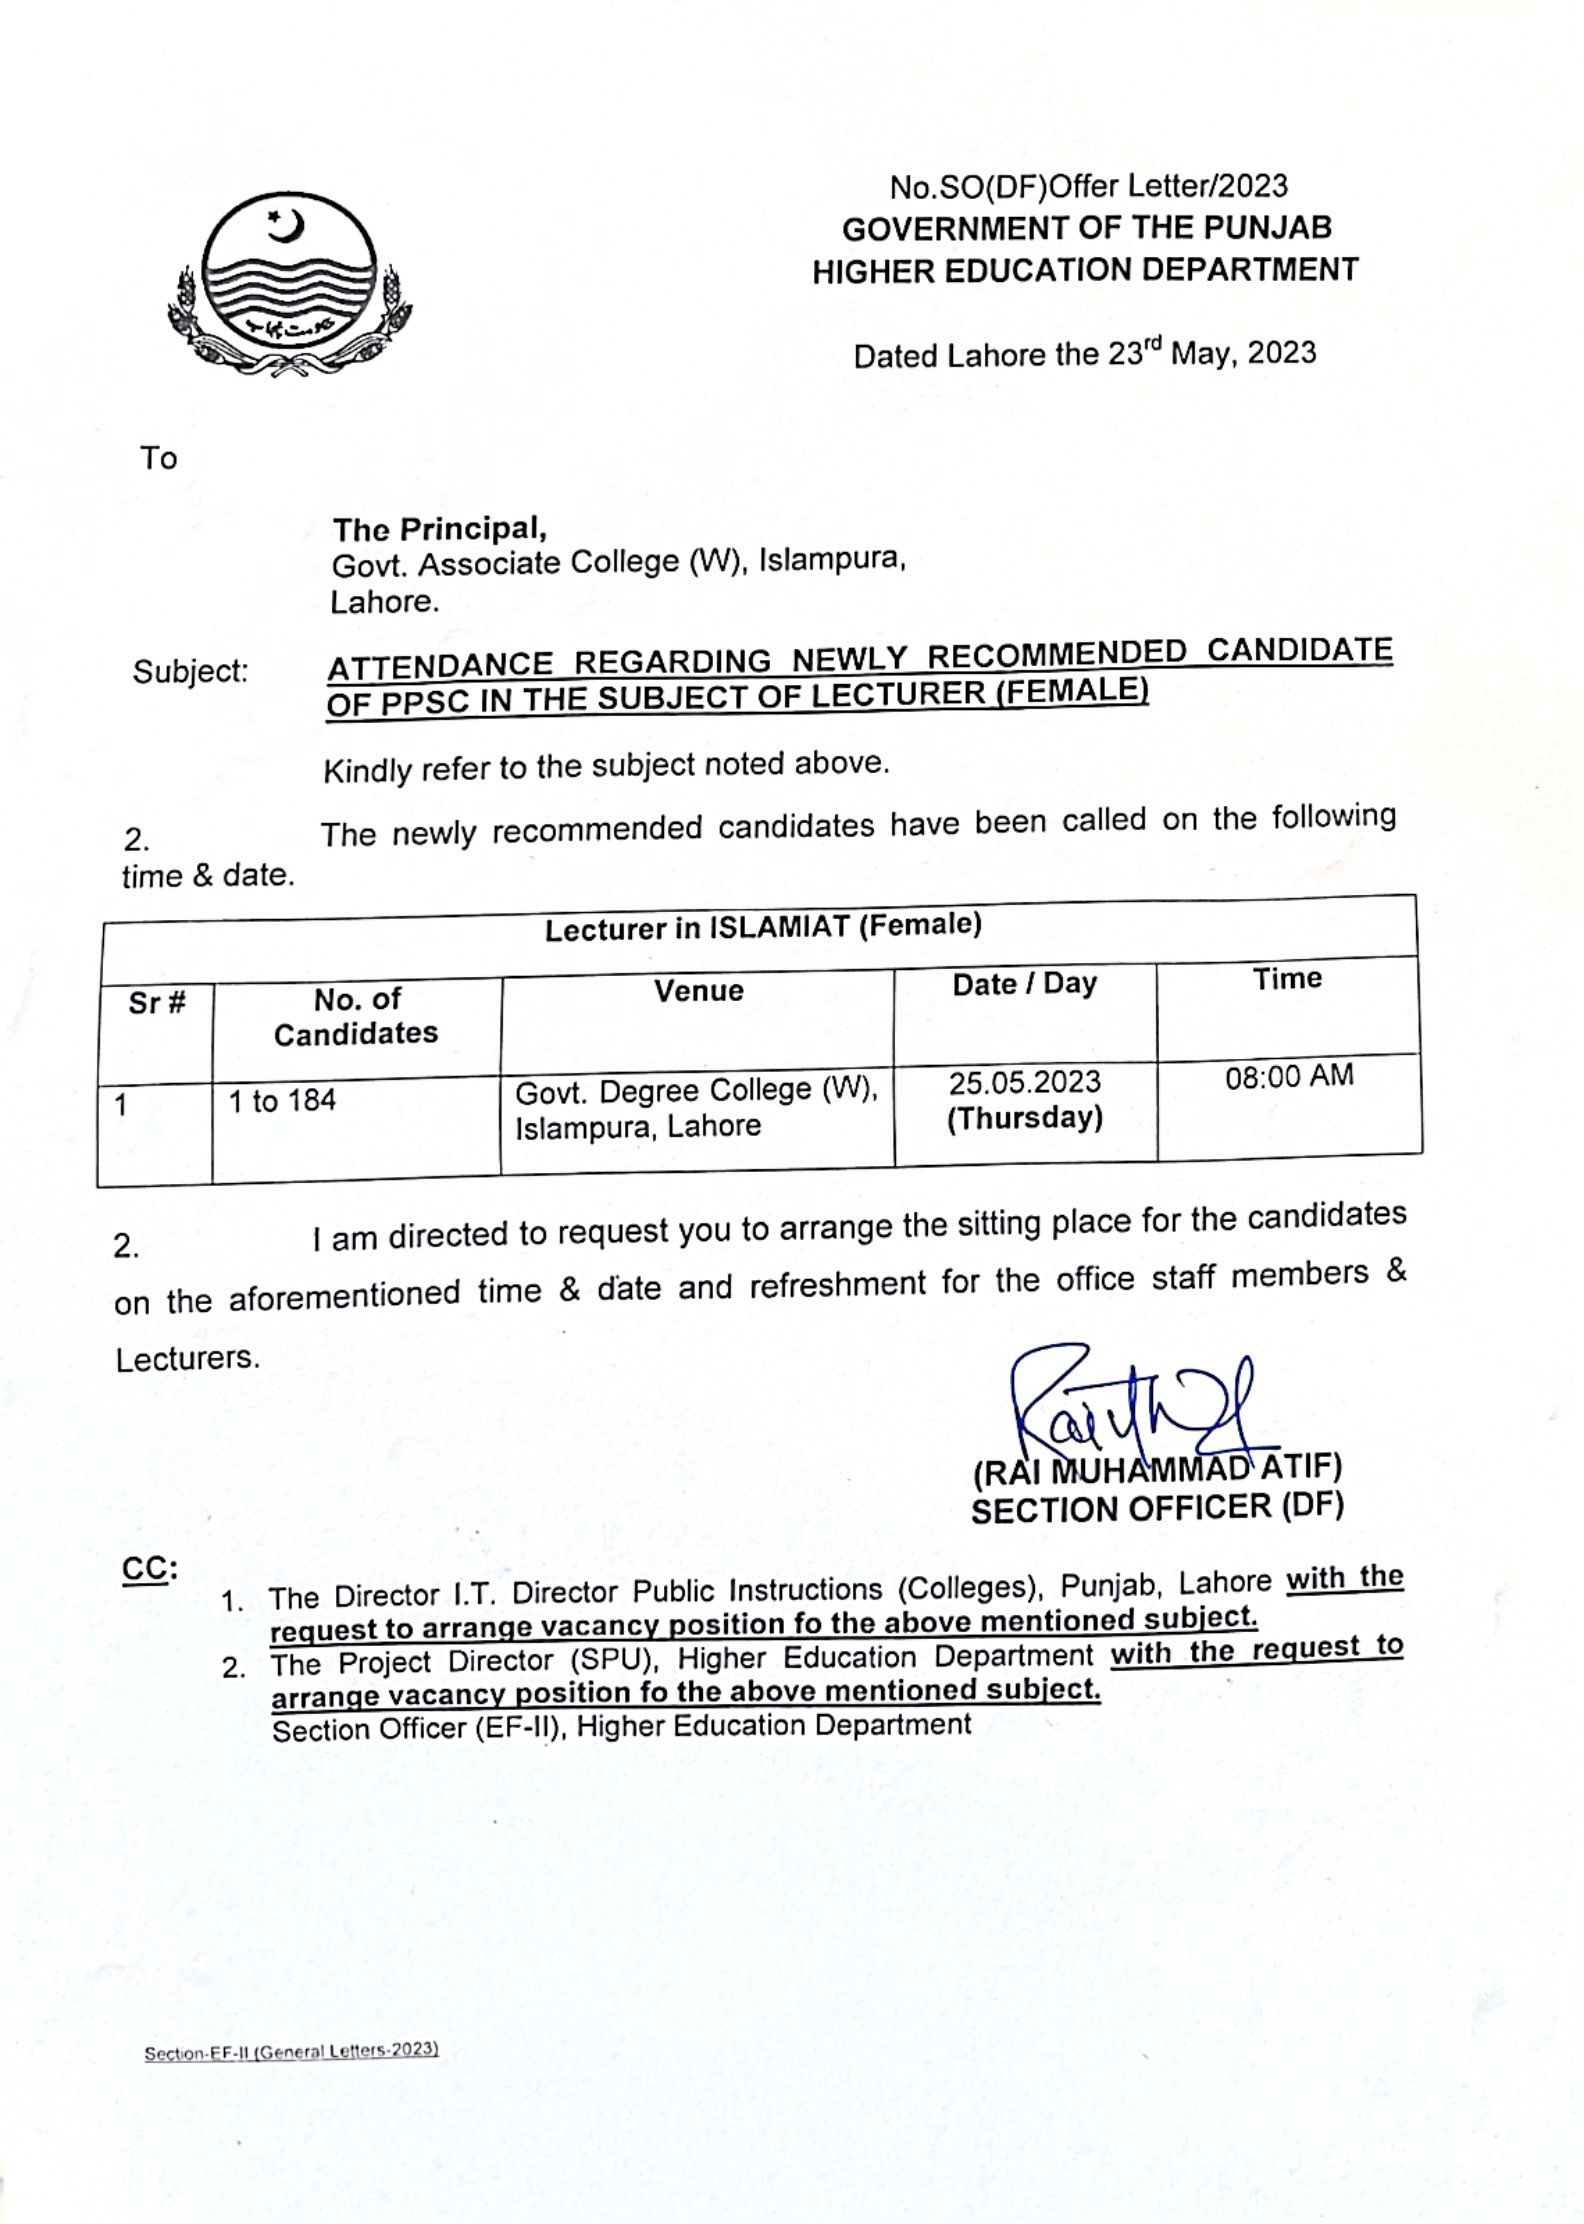 Notification of Calls to Newly Recommended PPSC Lecturer in Islamiat (Female)